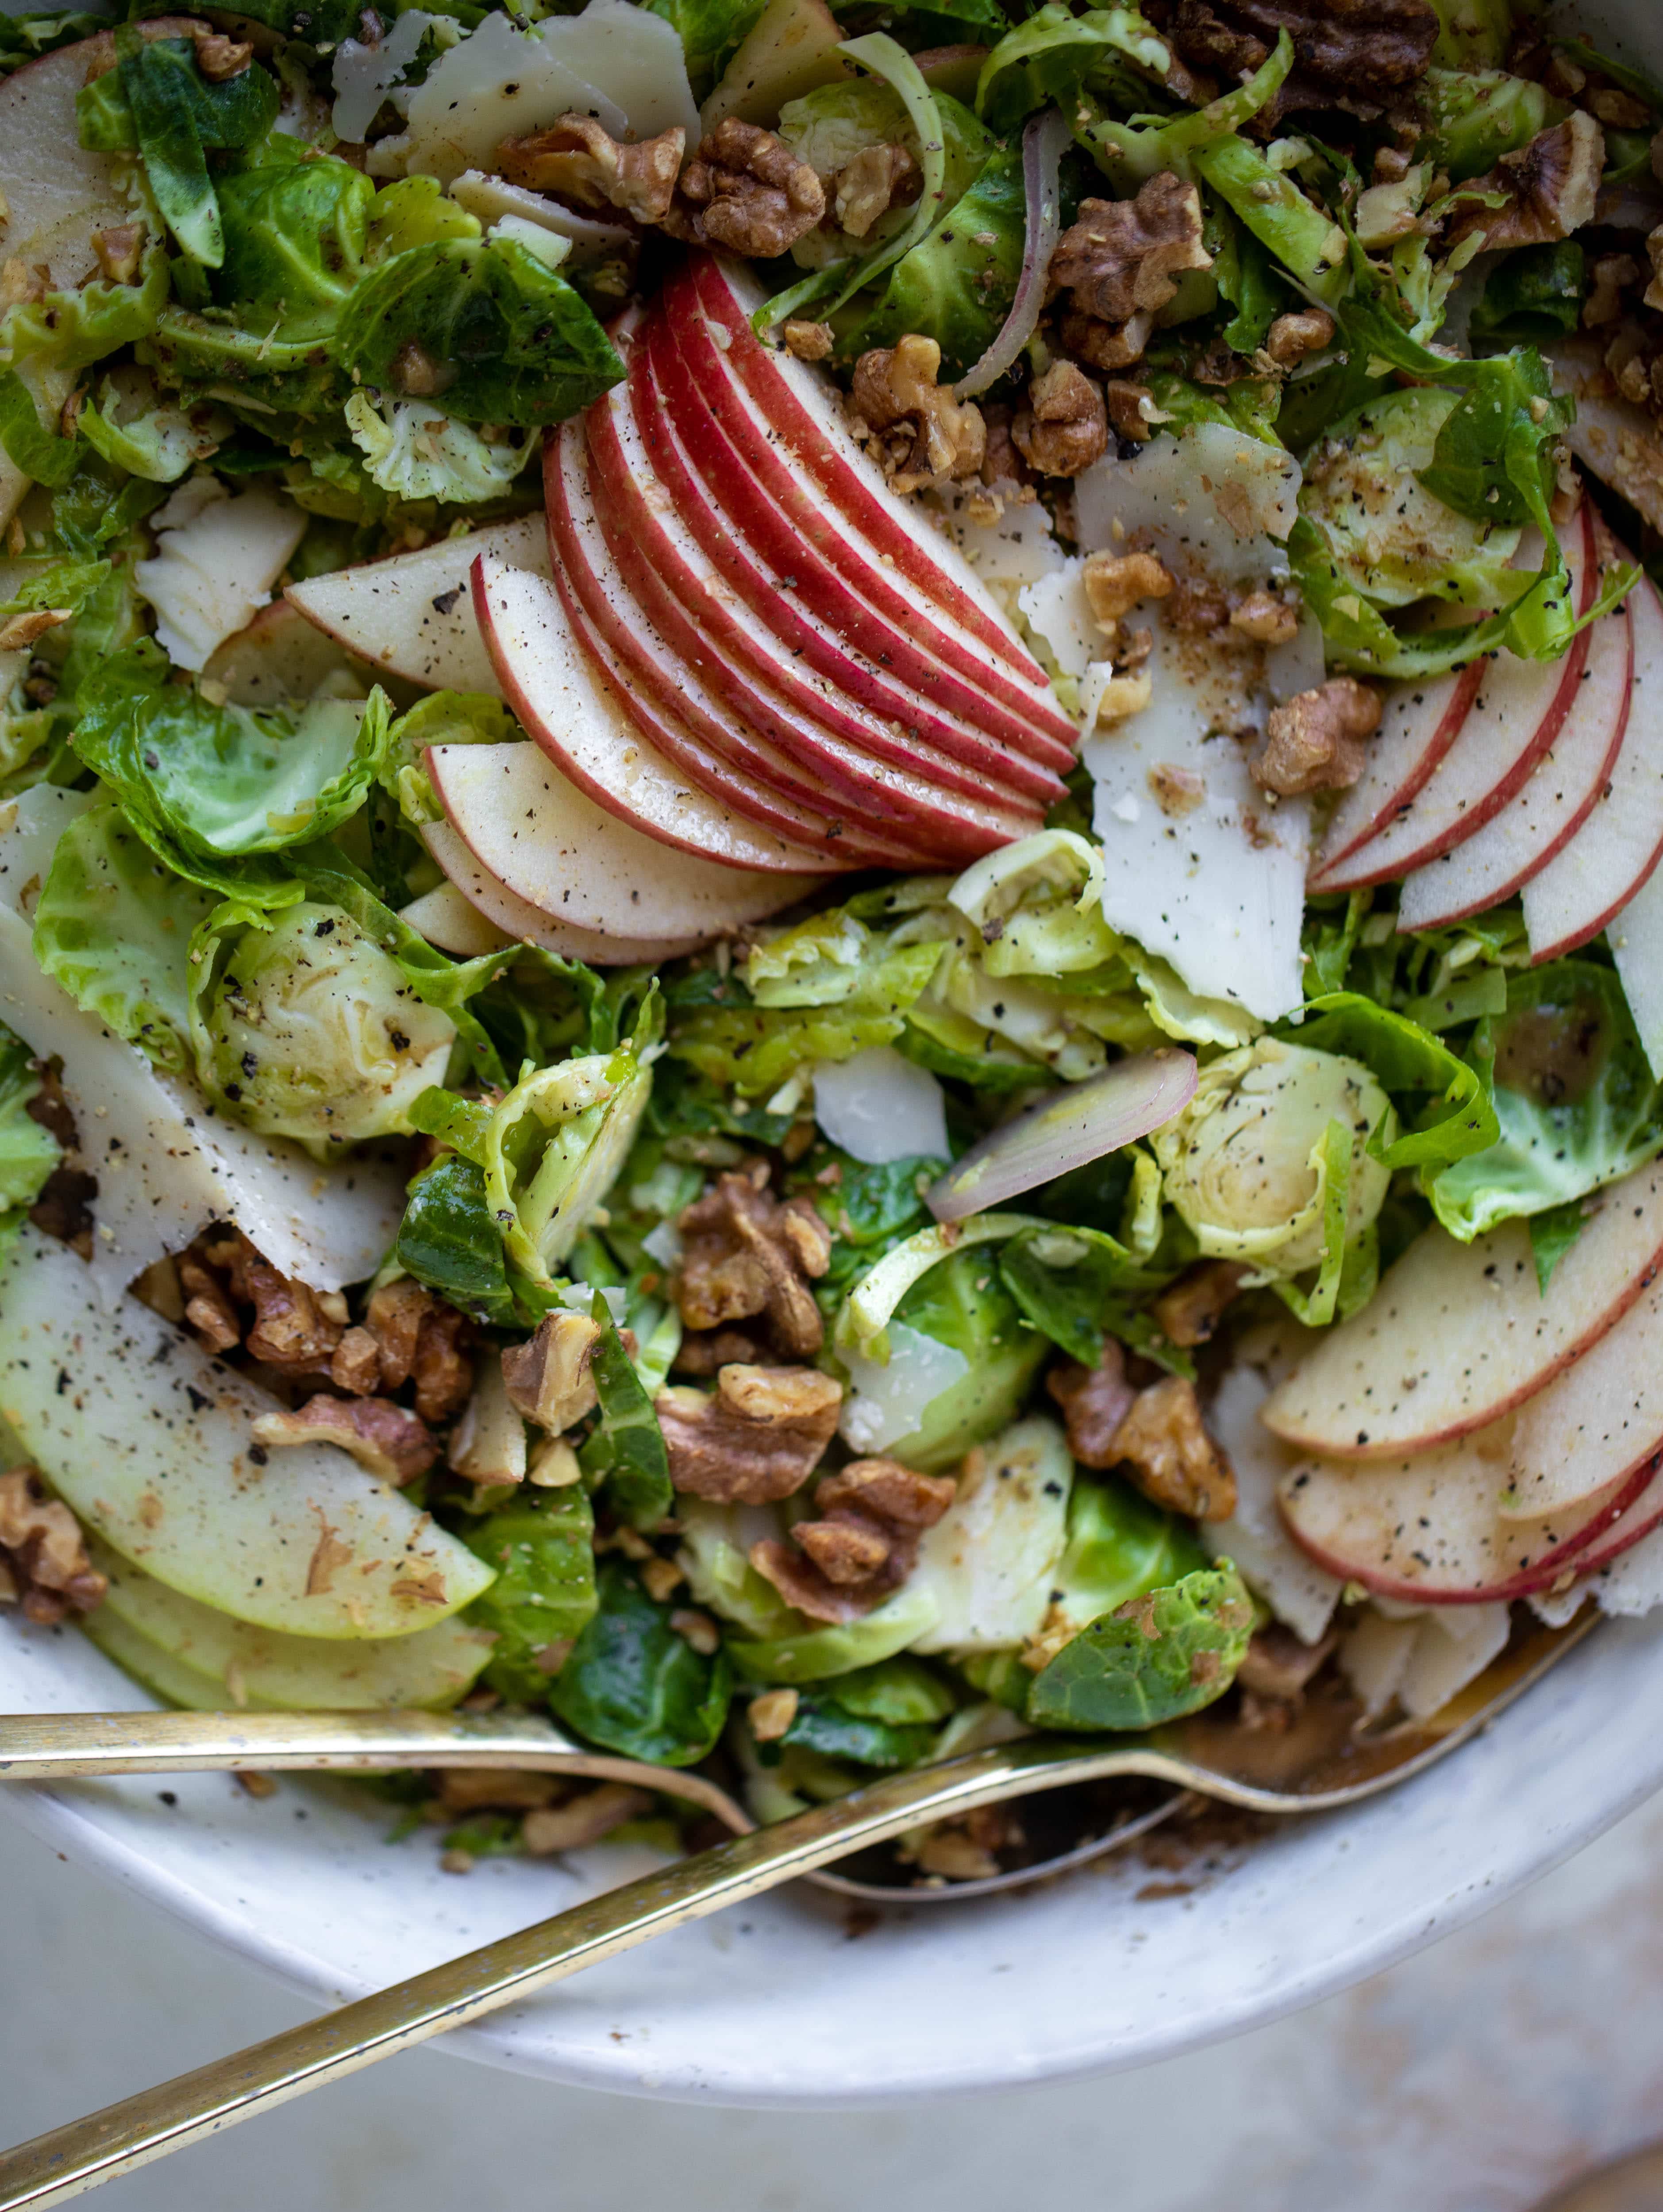 This crunchy brussels sprouts apple salad is filled with sprouts, apples, shallots, cinnamon toasted walnuts and drizzled with a brown butter dressing. 